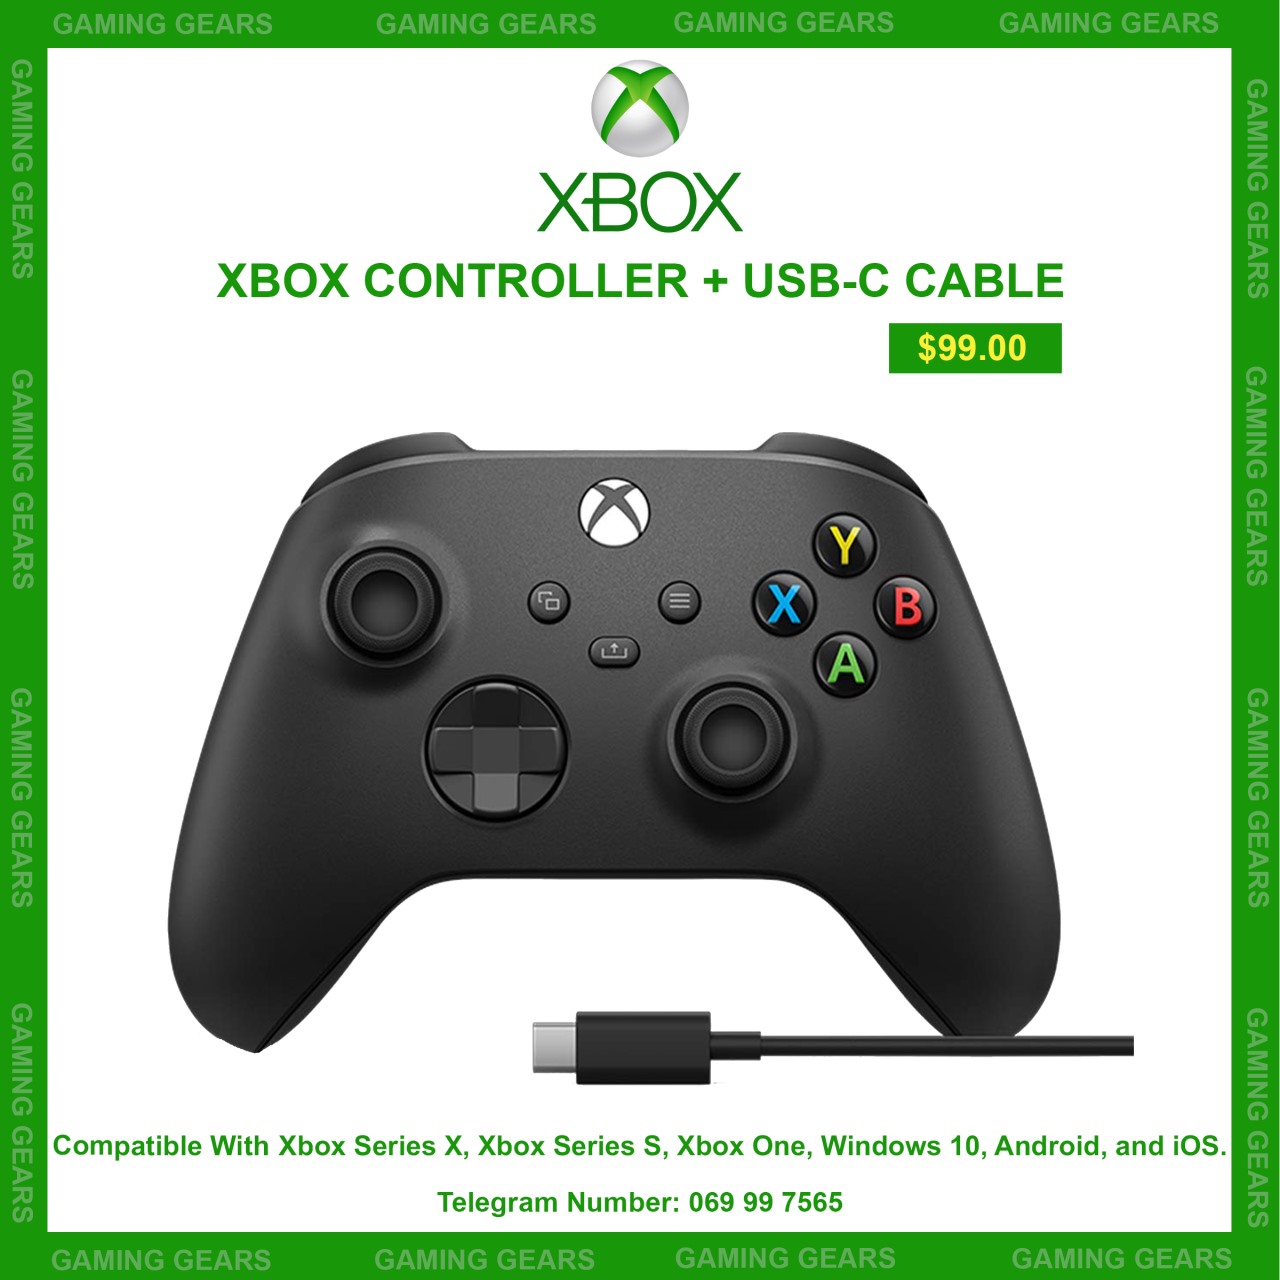 XBOX CONTROLLER + USB-C CABLE